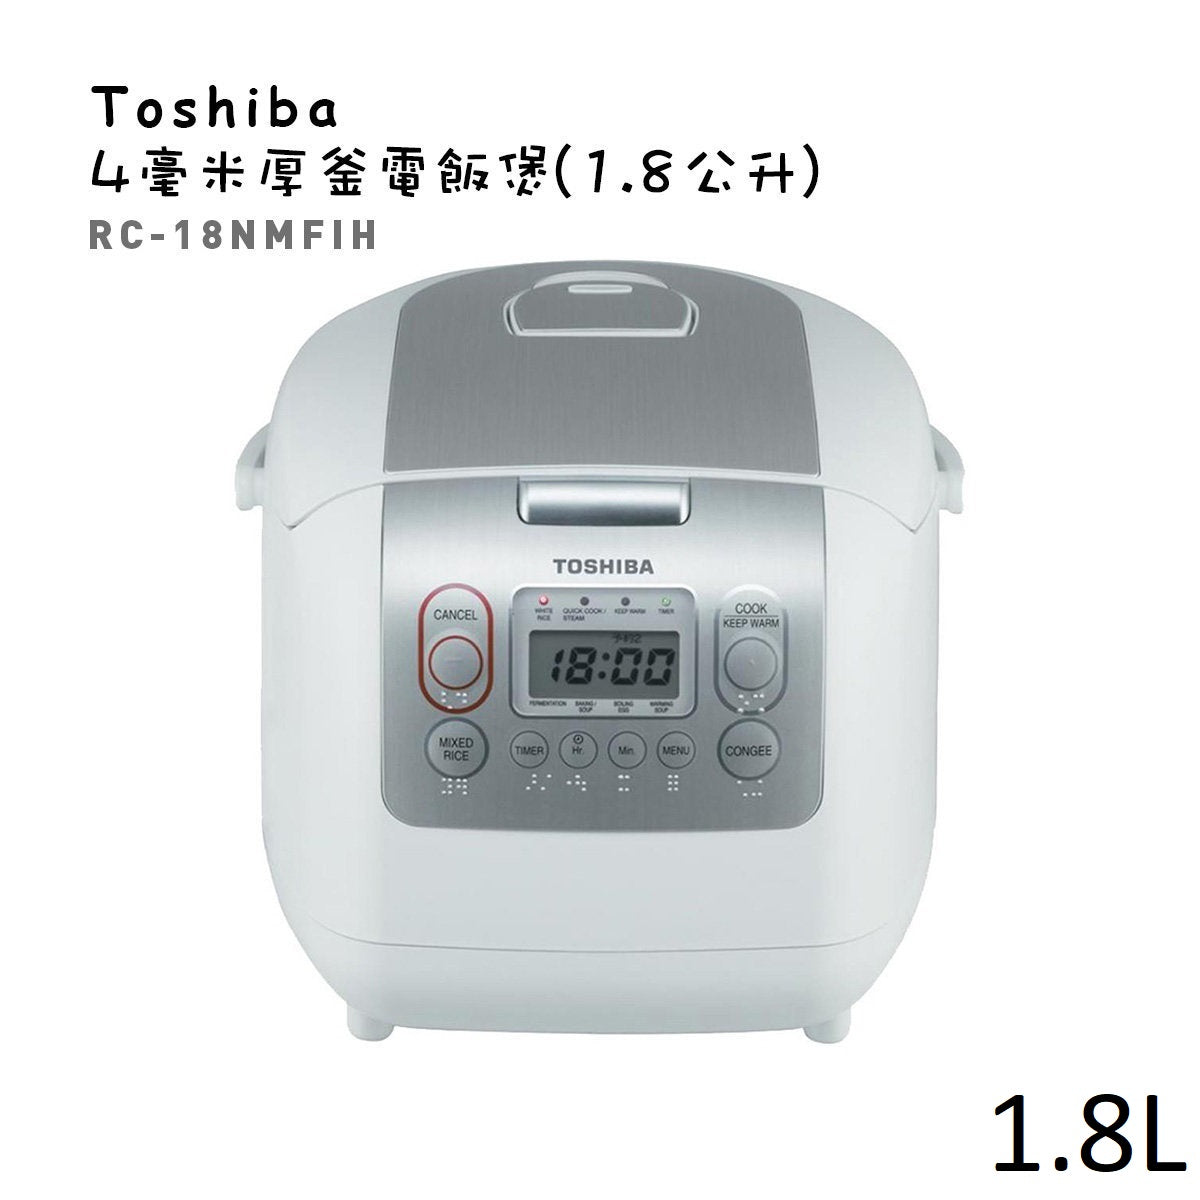 Toshiba Rice Cooker RC-10NMFIH/RC-18NMFIH (Made in Thailand) - 1.8L  RC-18NMFIH